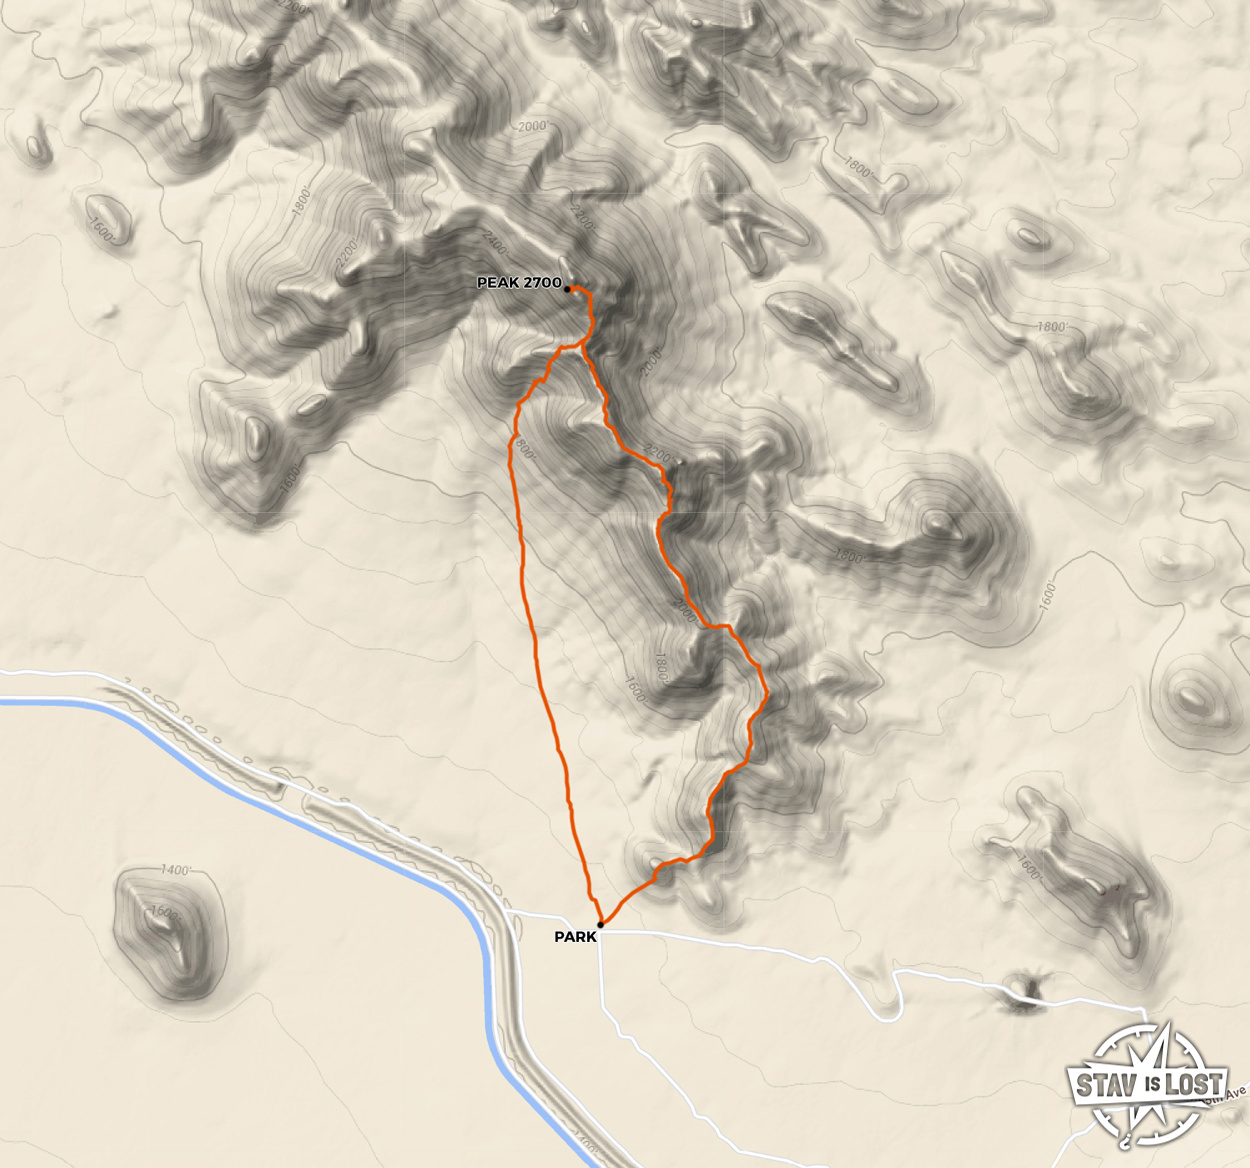 map for Southern Big Horn Mountains (Peak 2700) by stav is lost